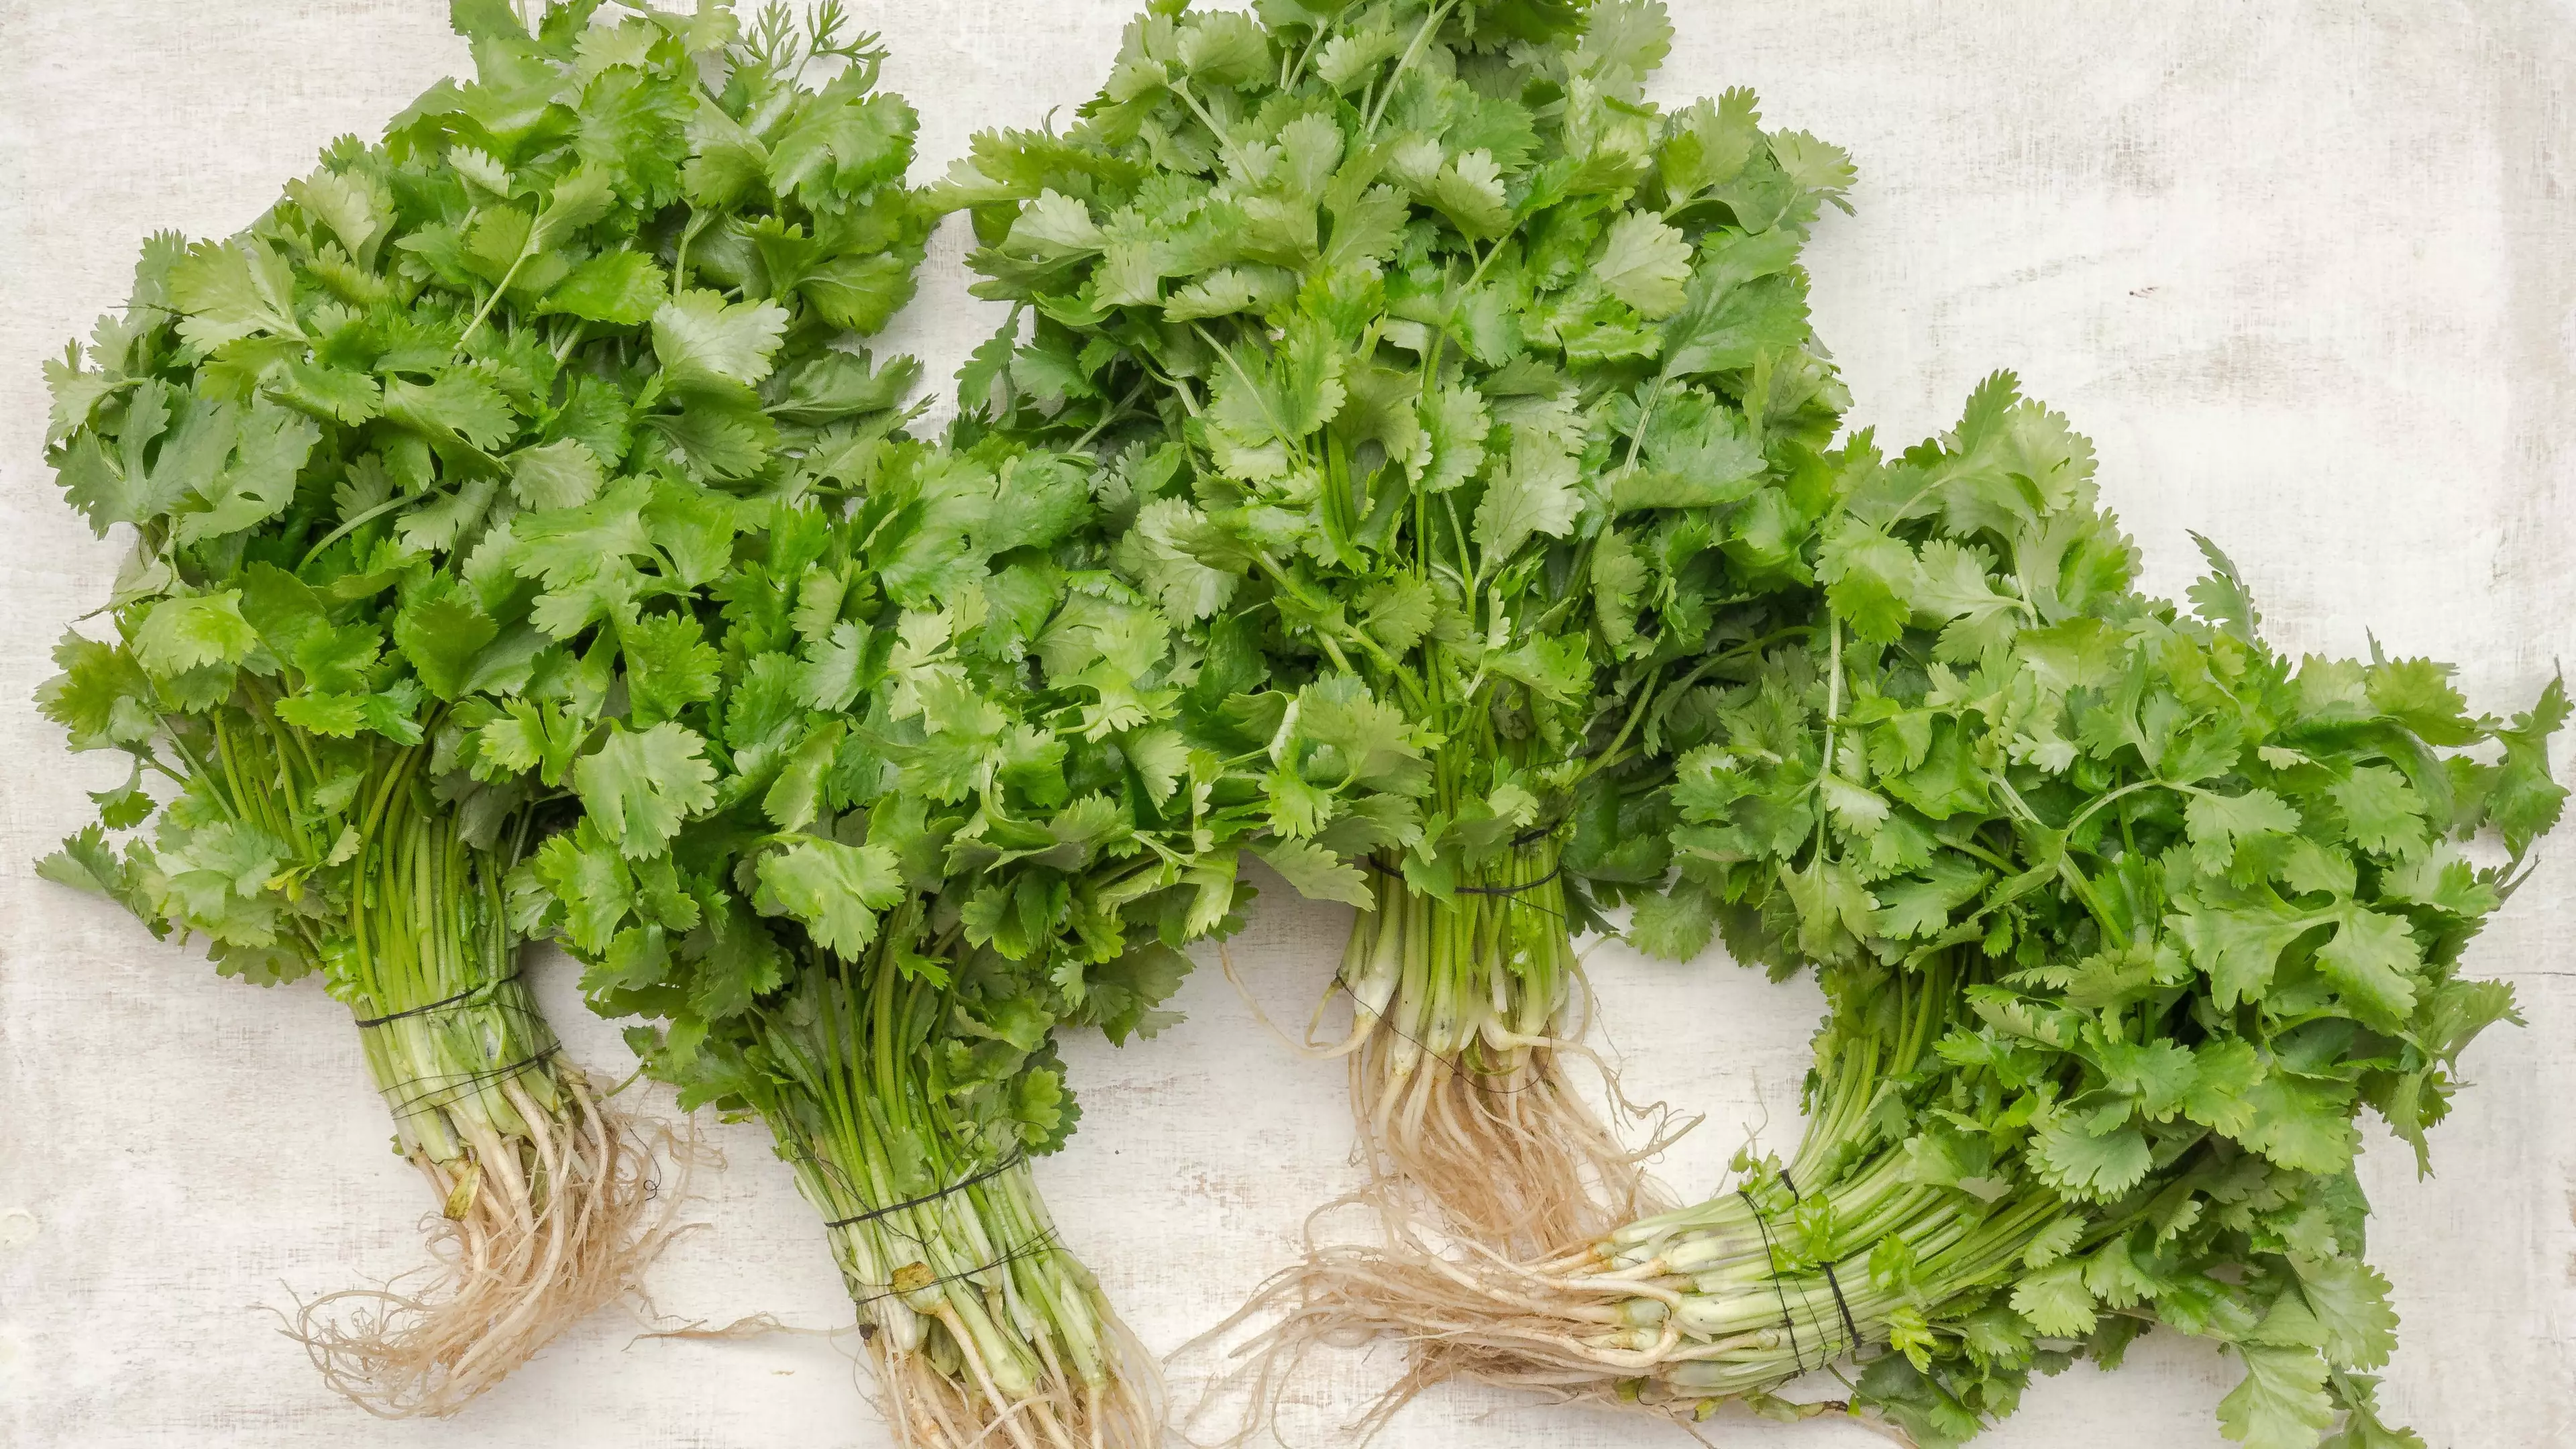 This Facebook Page Dedicated To People Who Hate Coriander Has 220,000 Members And We're Here For It